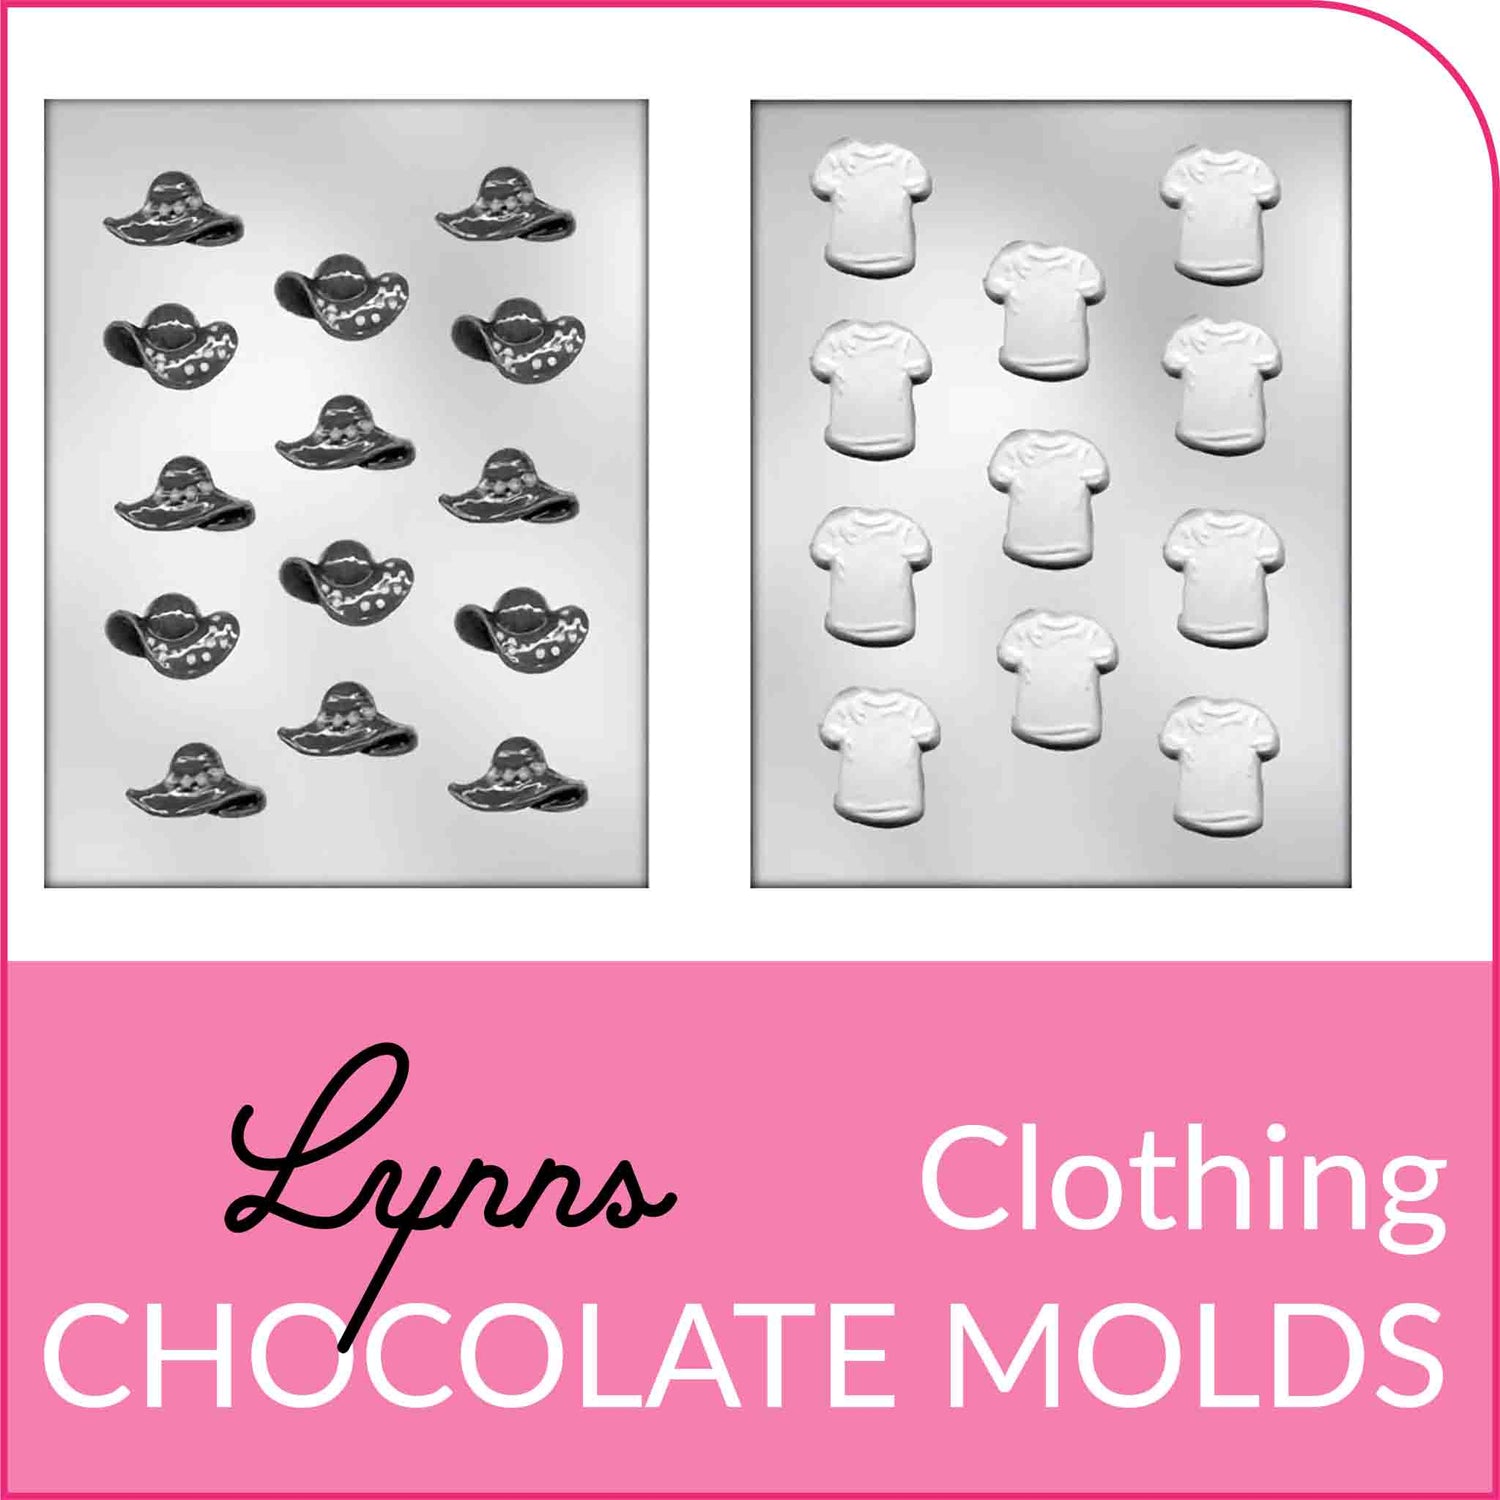 Shop Lynn's Collection of Chocolate Molds Shape Like Clothing, from high heeled shoes to t-shirt and oversized ladies hats.